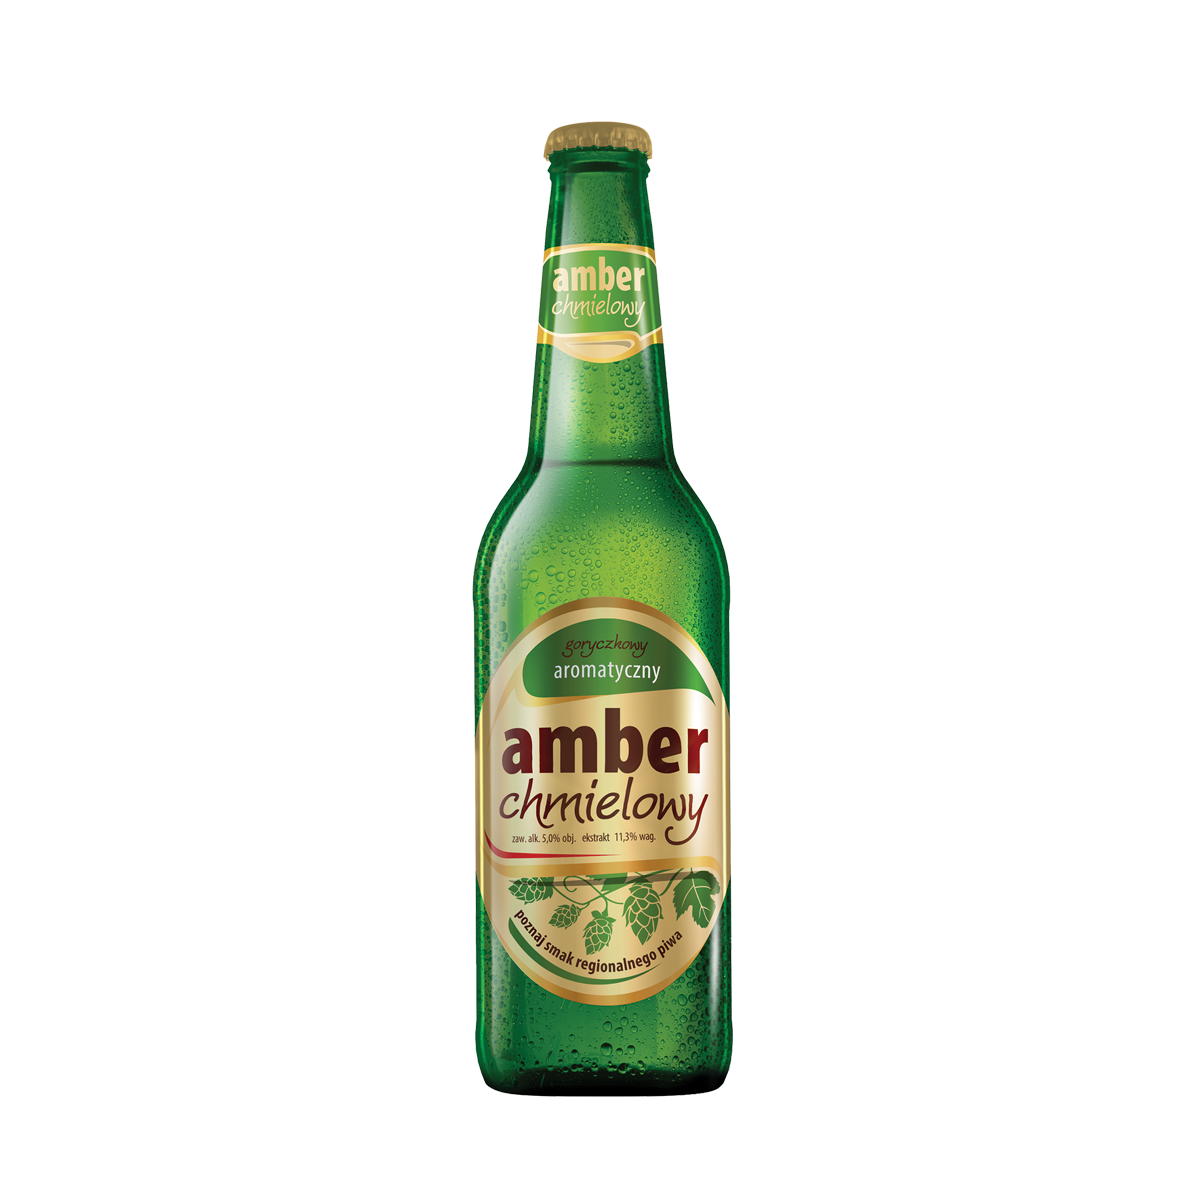 http://beerimporters.us/wp-content/uploads/2017/06/amber.png